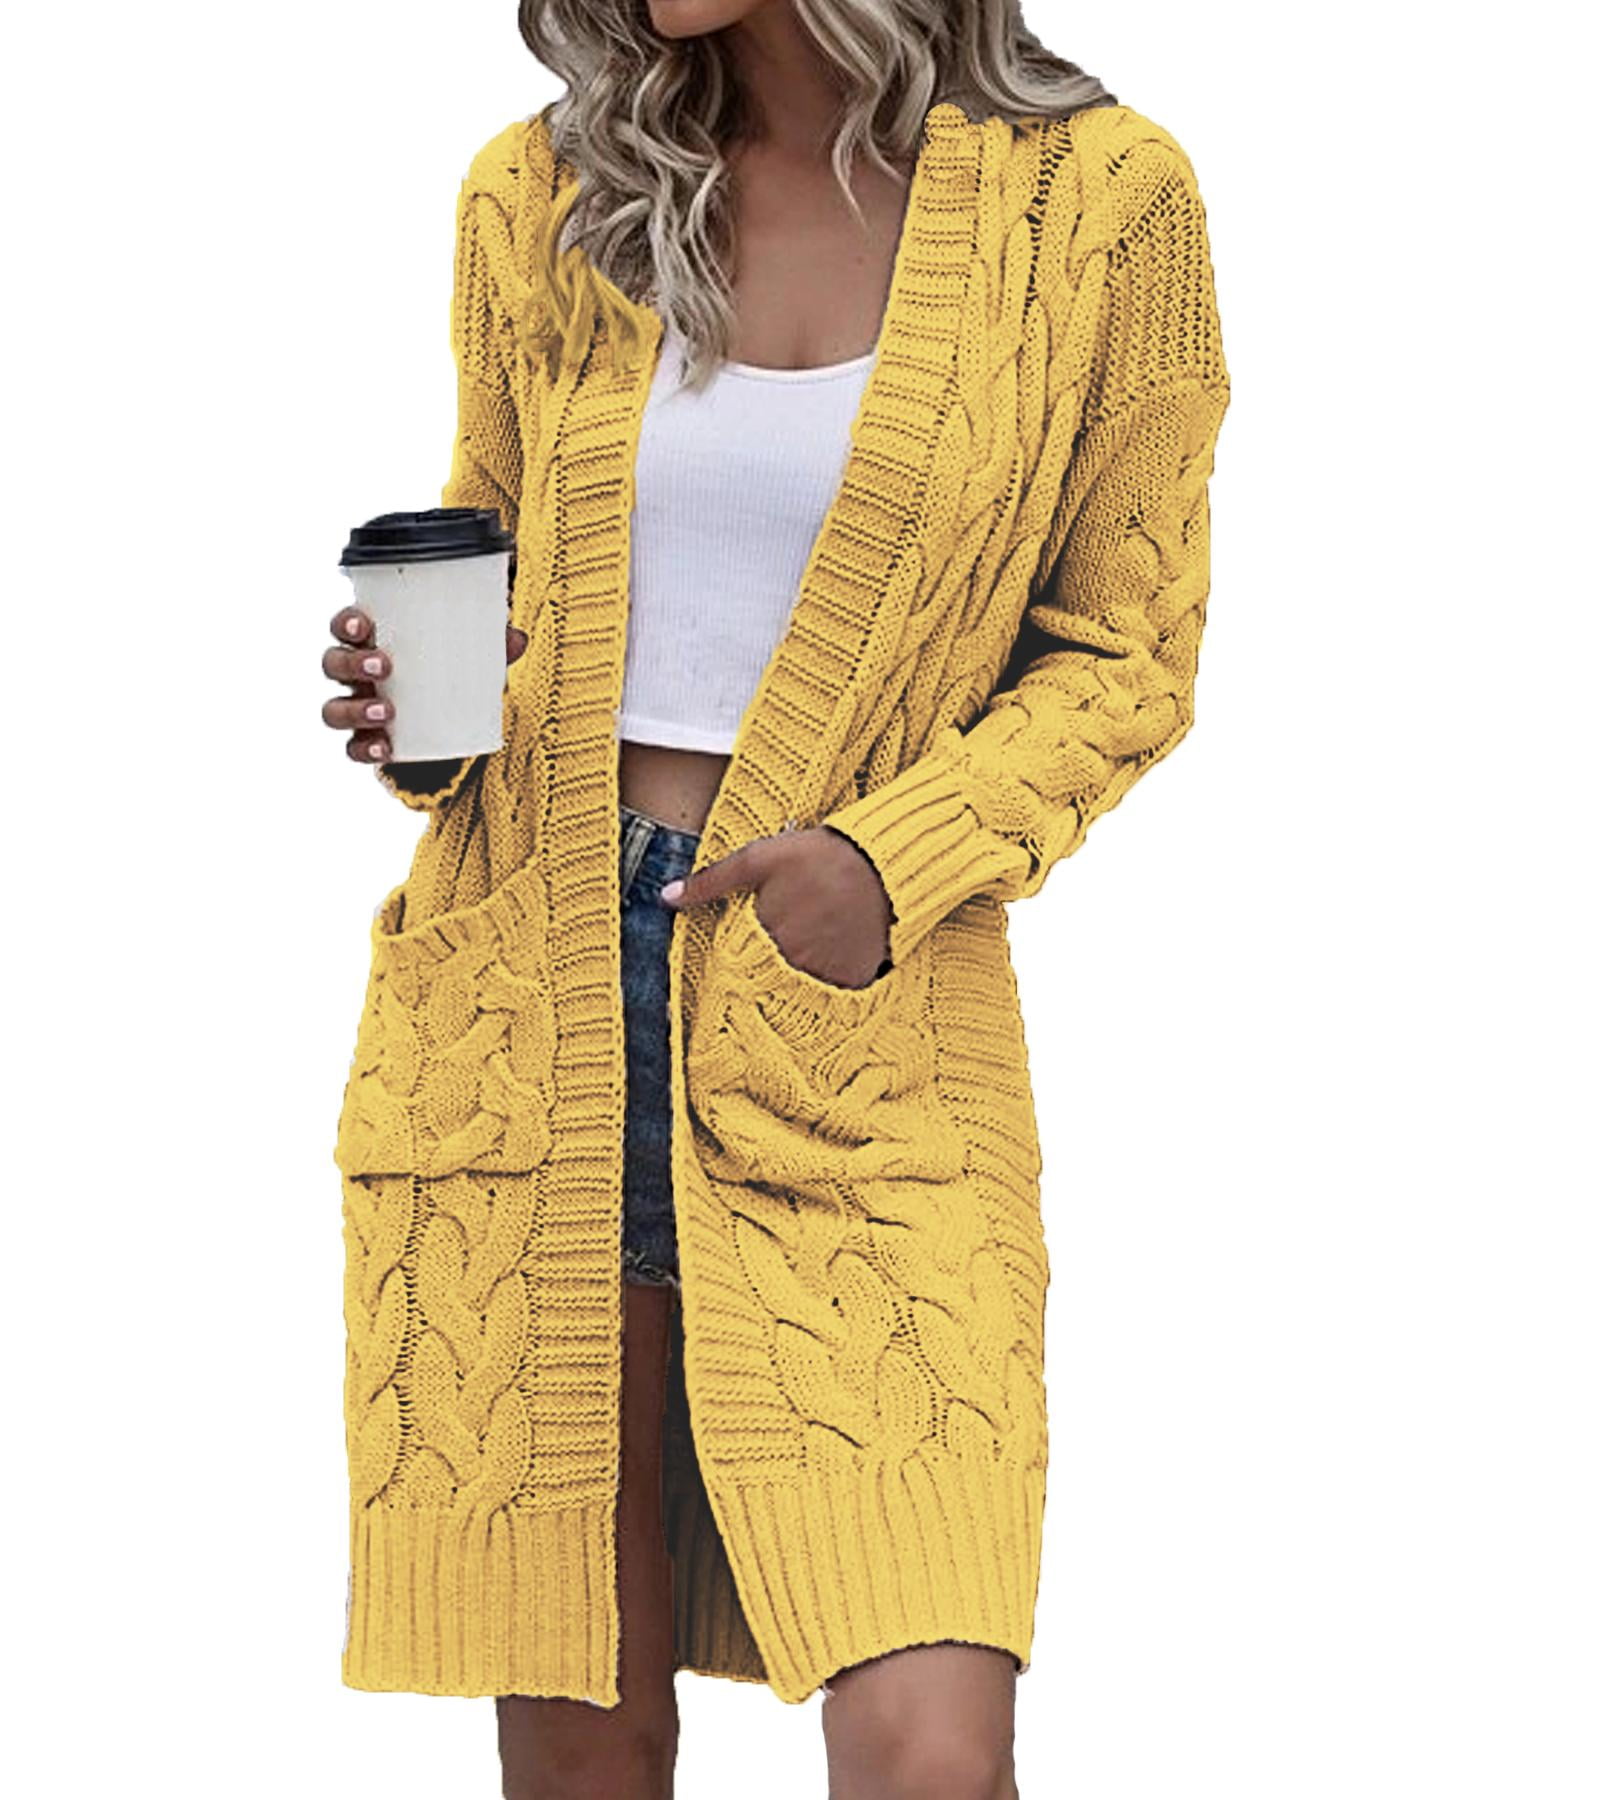 Fueri Women's Open Front Cable Knit Sweater Cardigan Long Sleeve Solid ...